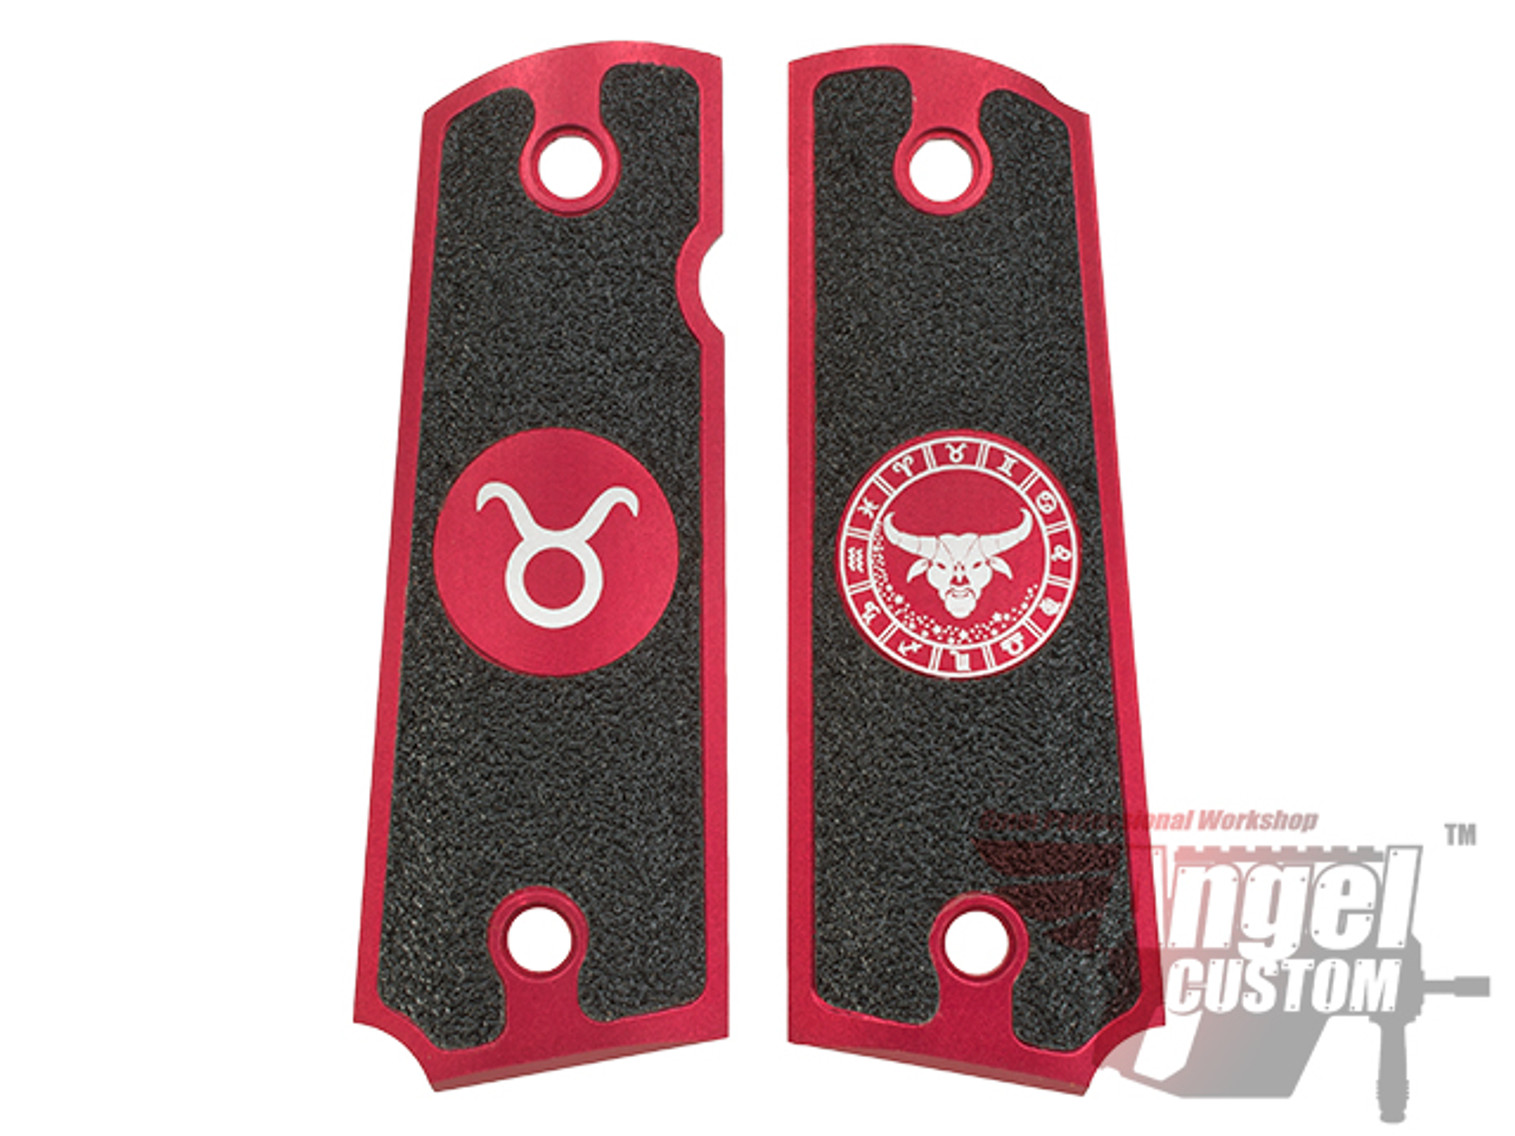 Angel Custom CNC Machined Tac-Glove "Zodiac" Grips for WE-Tech 1911 Series Airsoft Pistols - Taurus (Red)